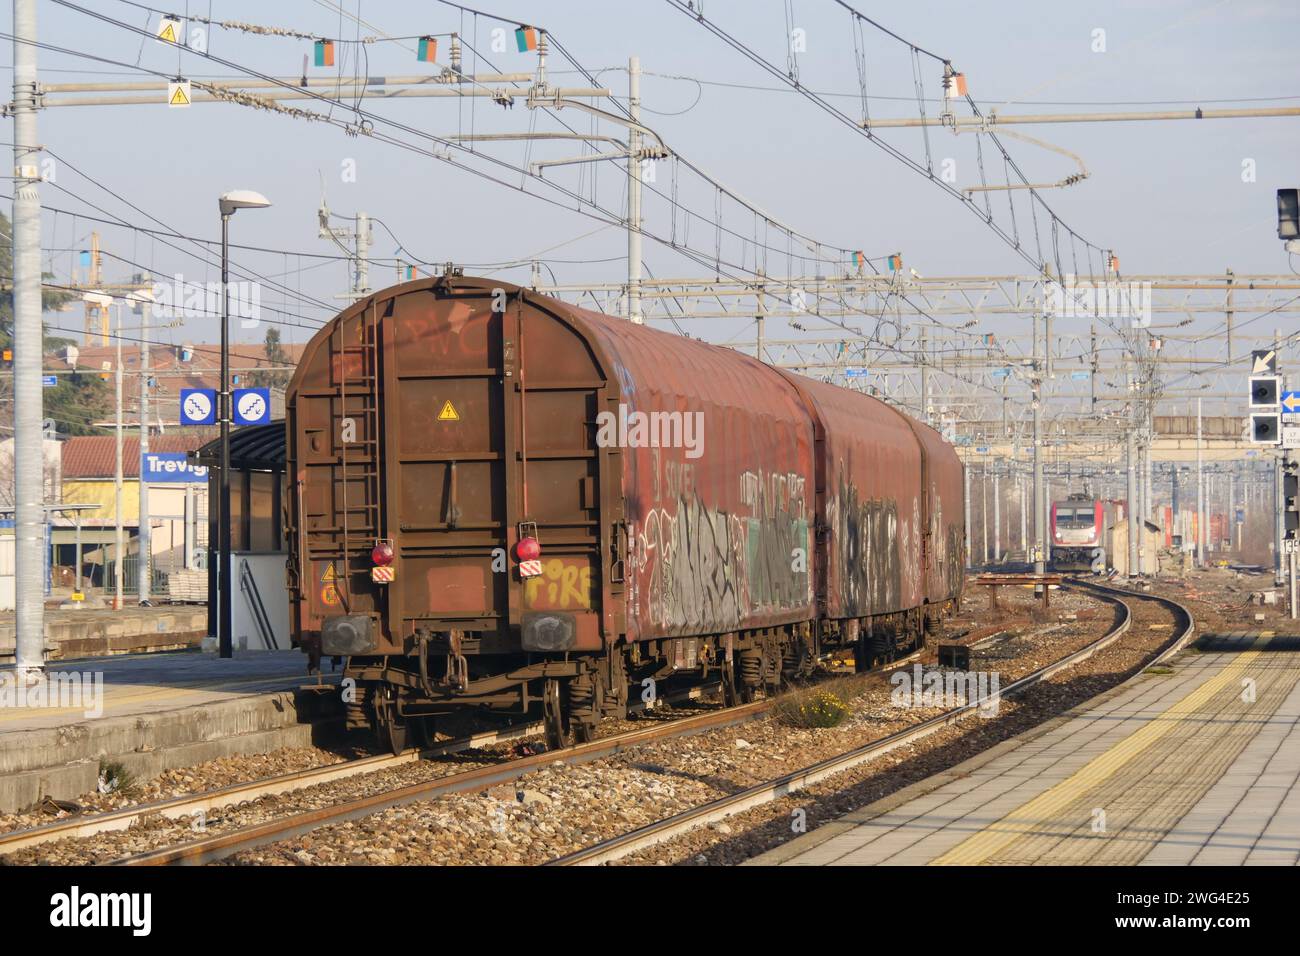 Freight train in transit at Treviglio central station on the Milan-Venice railway Stock Photo